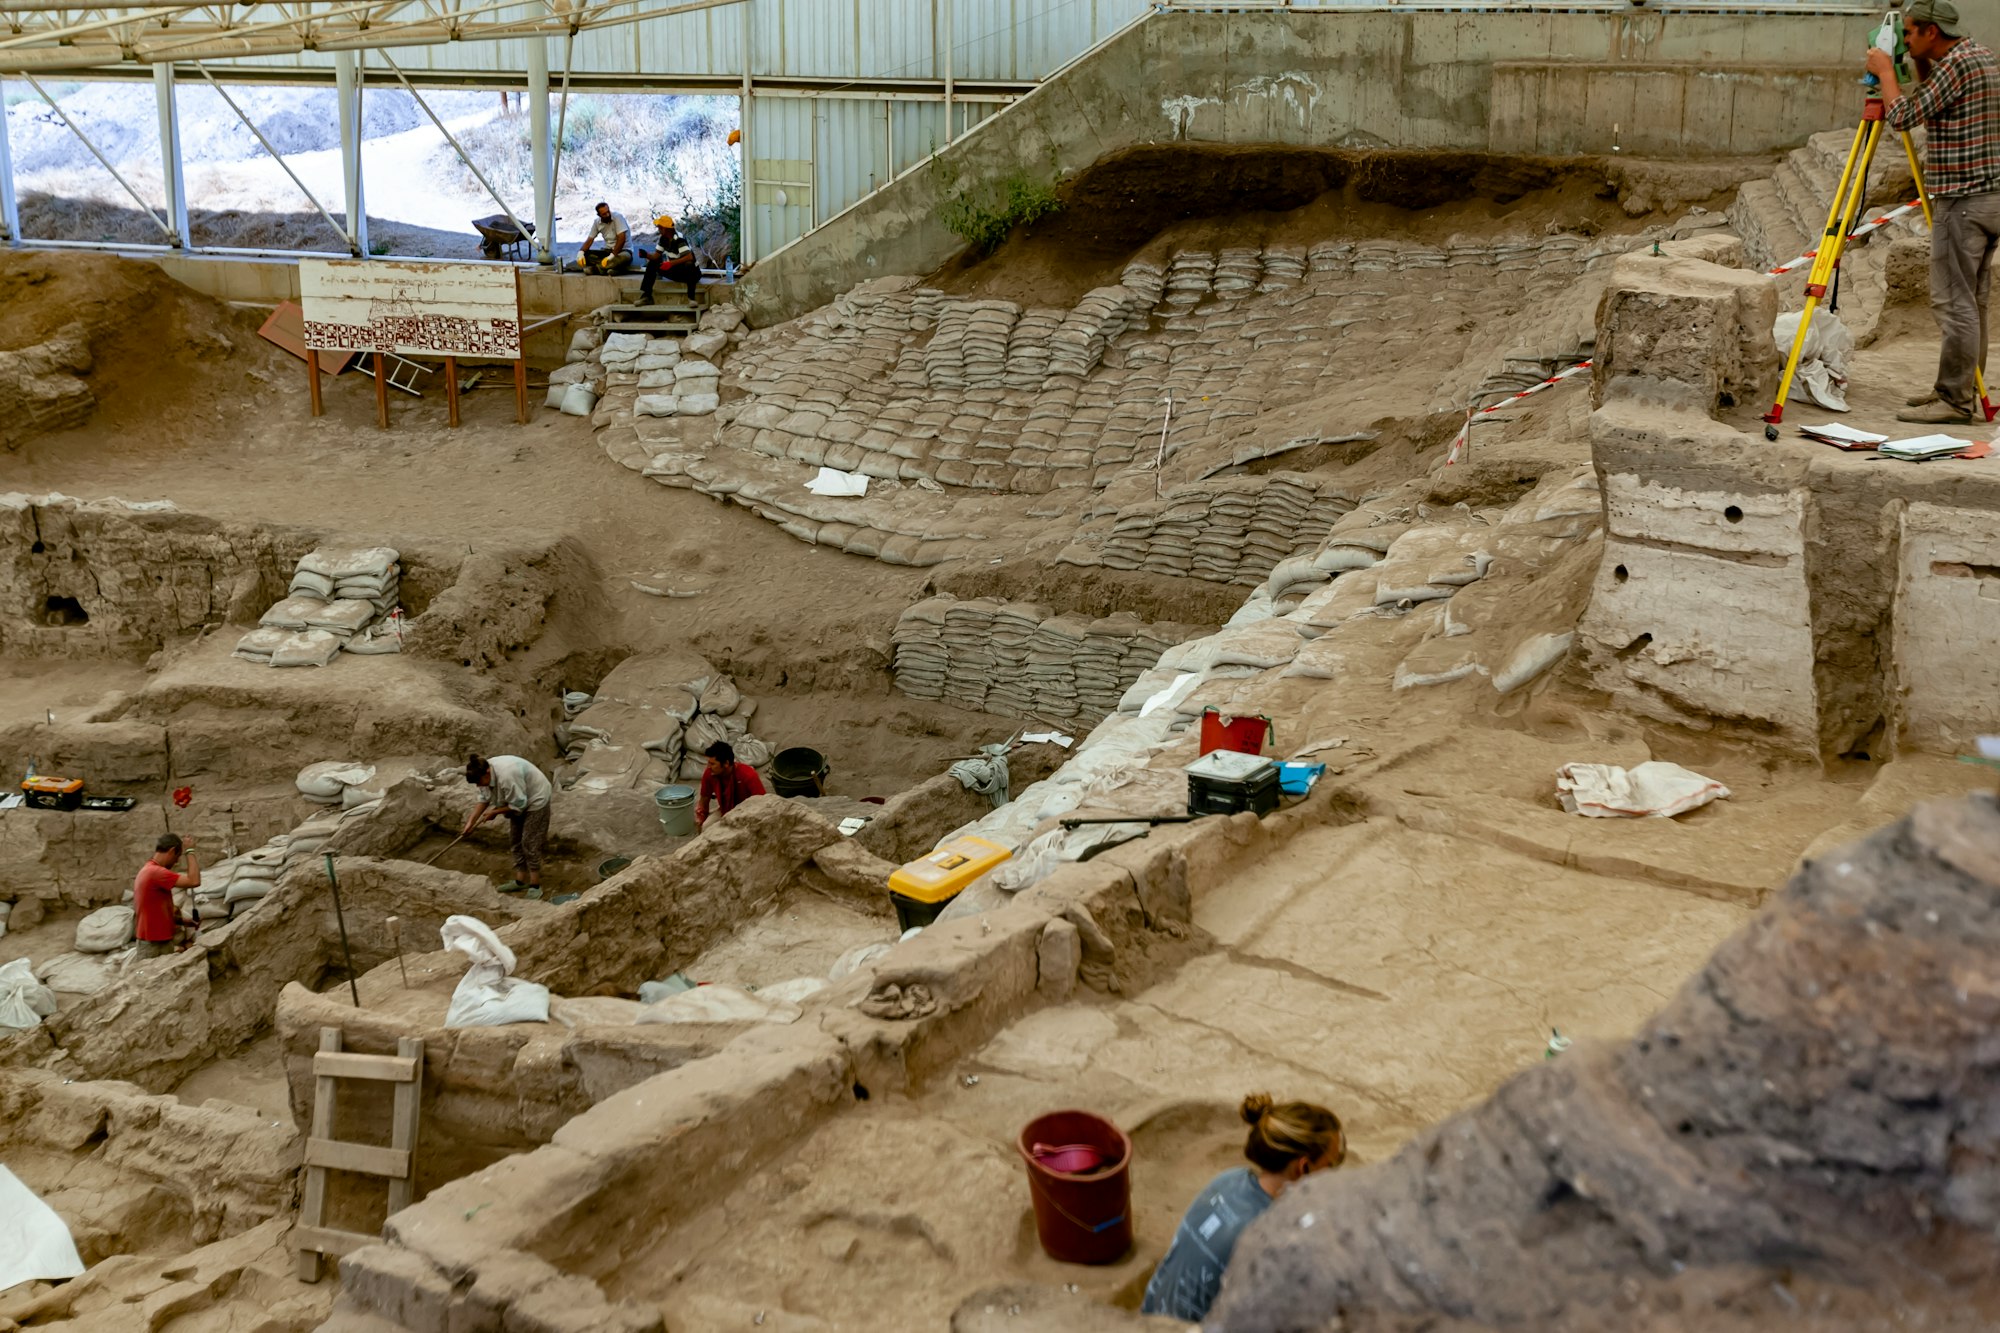 Çatalhöyük was a very large Neolithic proto-city settlement in southern Anatolia, which existed from approximately 7500 BC to 5700 BC, and flourished around 7000 BC. In July 2012, it was inscribed as a UNESCO World Heritage Site.

It is located overlooking the Konya Plain, southeast of the present-day city of Konya (ancient Iconium) in Turkey. The eastern settlement forms a mound which would have risen about 20m above the plain at the time of the latest Neolithic occupation. There is also a smaller settlement mound to the west and a Byzantine settlement a few hundred meters to the east. (Wiki)